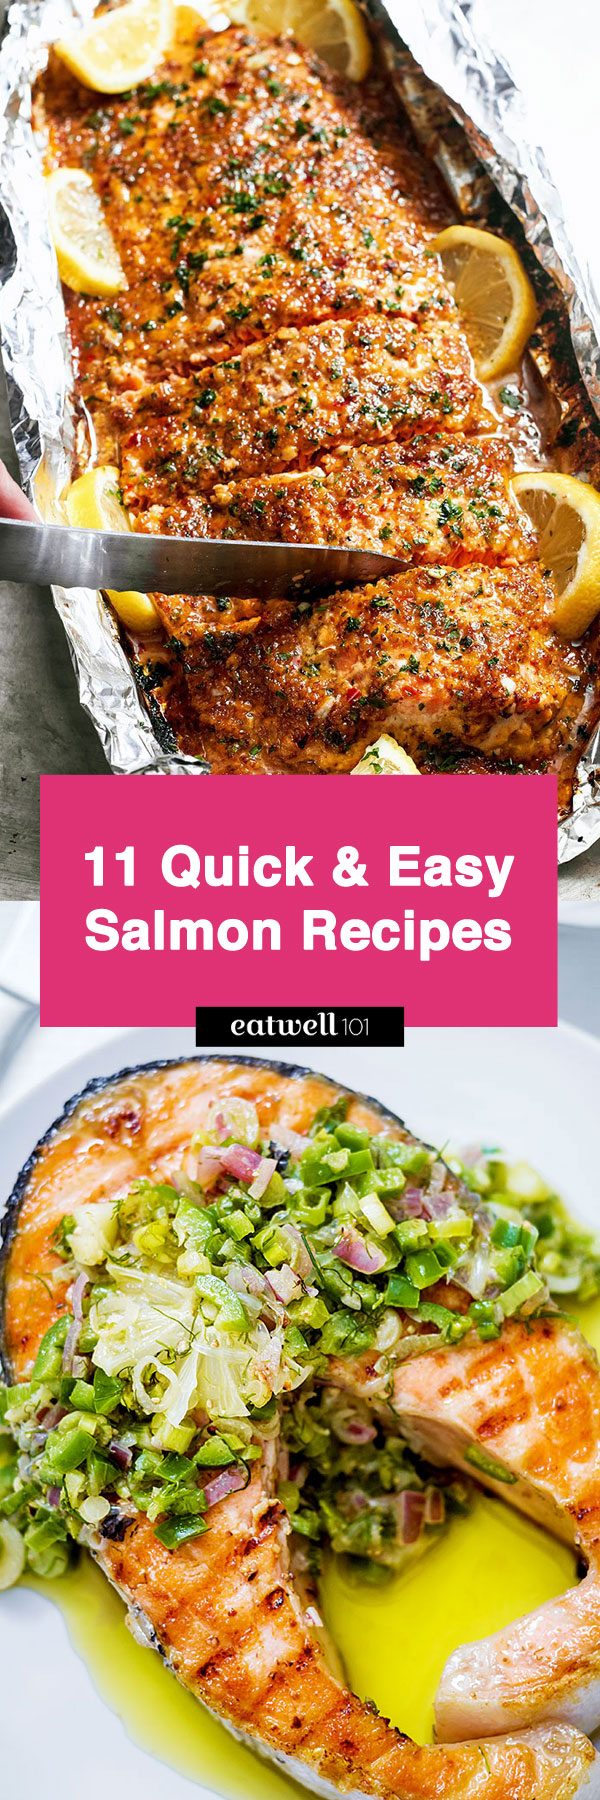 Salmon recipes — Healthy, versatile and delicious, a great way to get more Omega-3s into your diet.